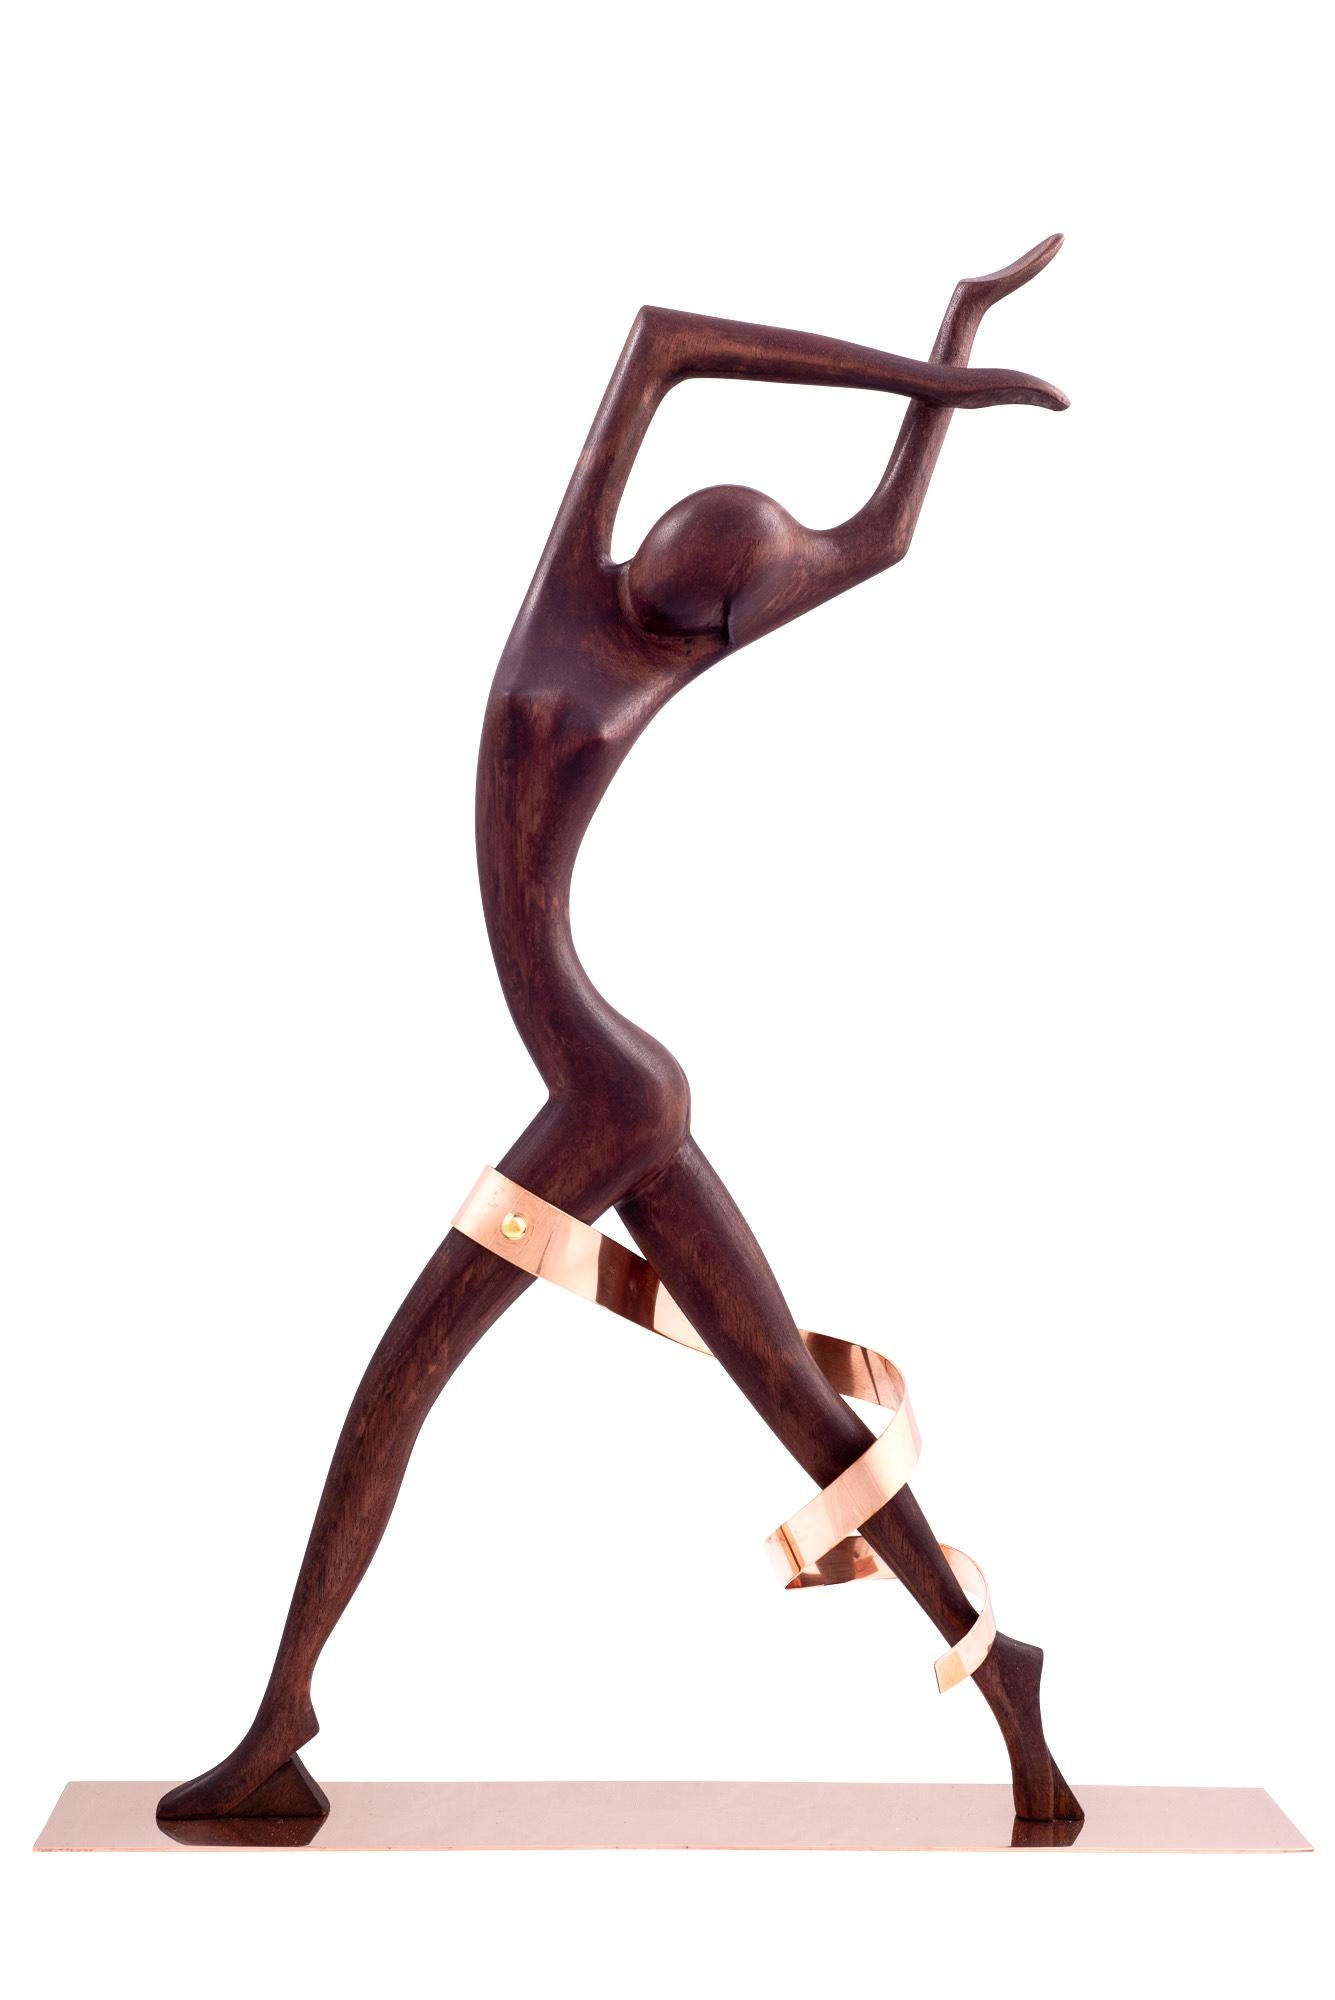 After being taken over by Karl Hagenauer, the workshop began to produce their famous figurines /After Karl Hagenauer took over the workshop, they began to produce their famous figurines.
The dancer shows a graceful pose with raised arms, one of the